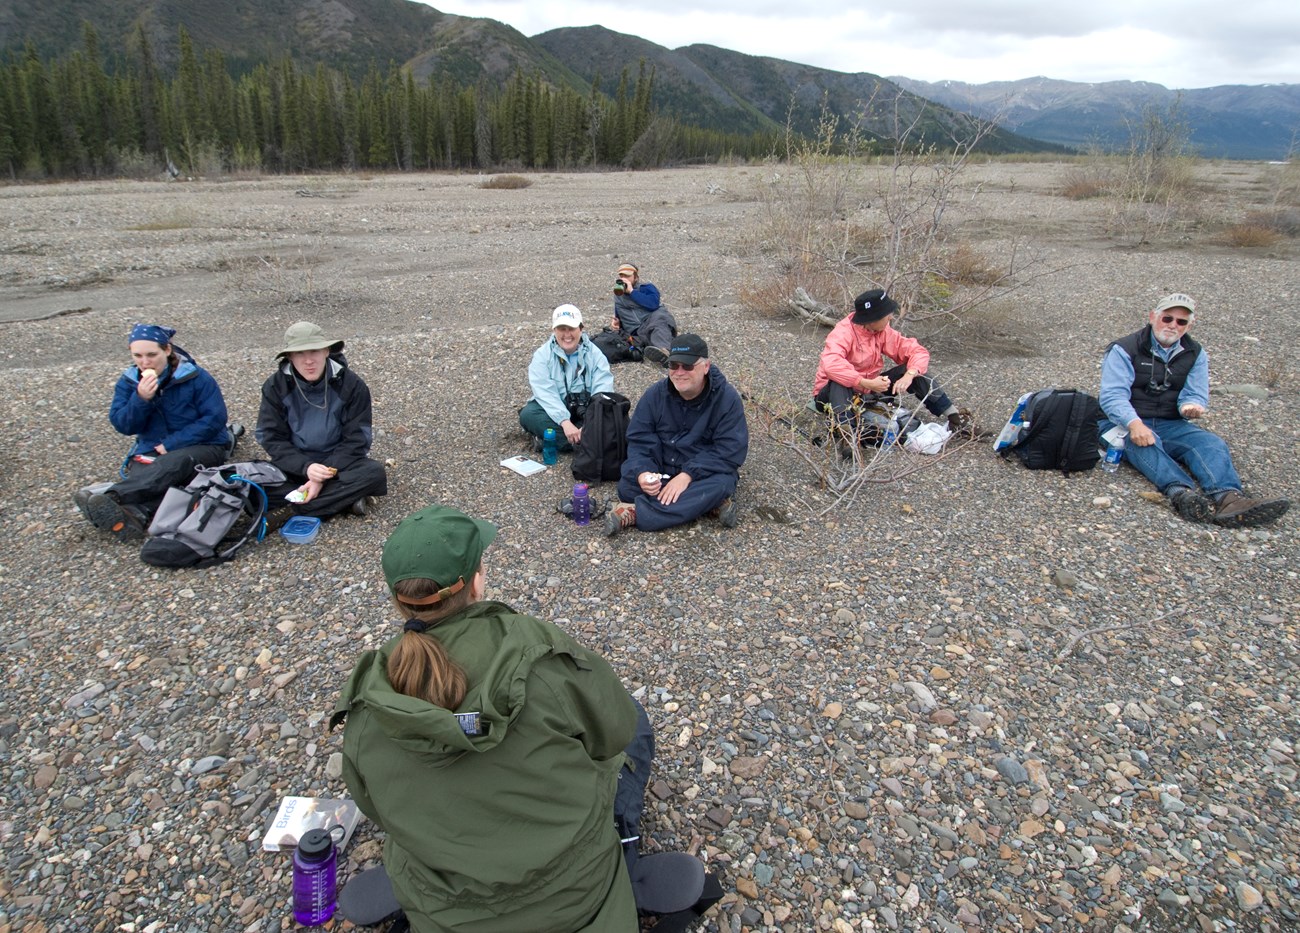 https://www.nps.gov/subjects/healthandsafety/images/NPS_DENA_Kent-Miller_-A-lunch-break-during-a-discovery-hike-at-Teklanika-River.jpg?maxwidth=1300&autorotate=false